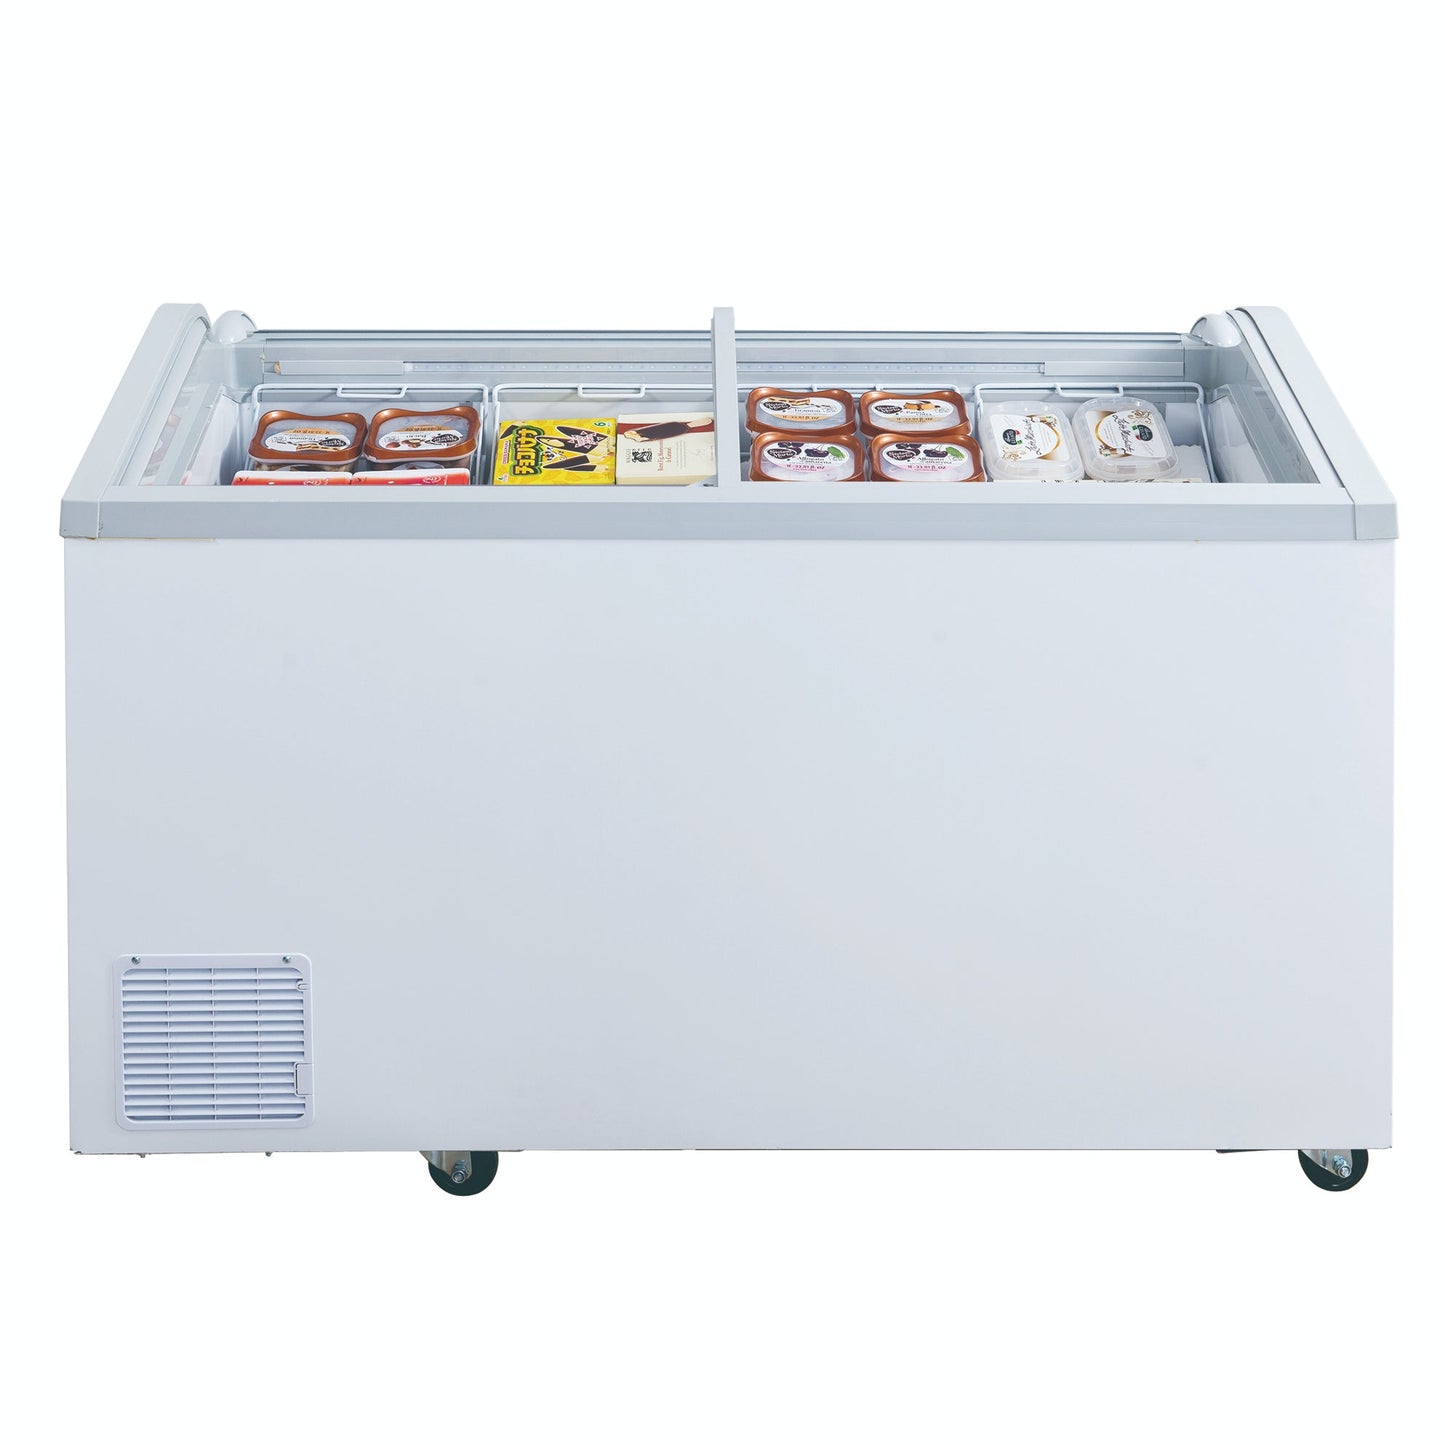 Dukers WD-700Y, 79" 2 Sliding Glass Door Chest Freezer in White